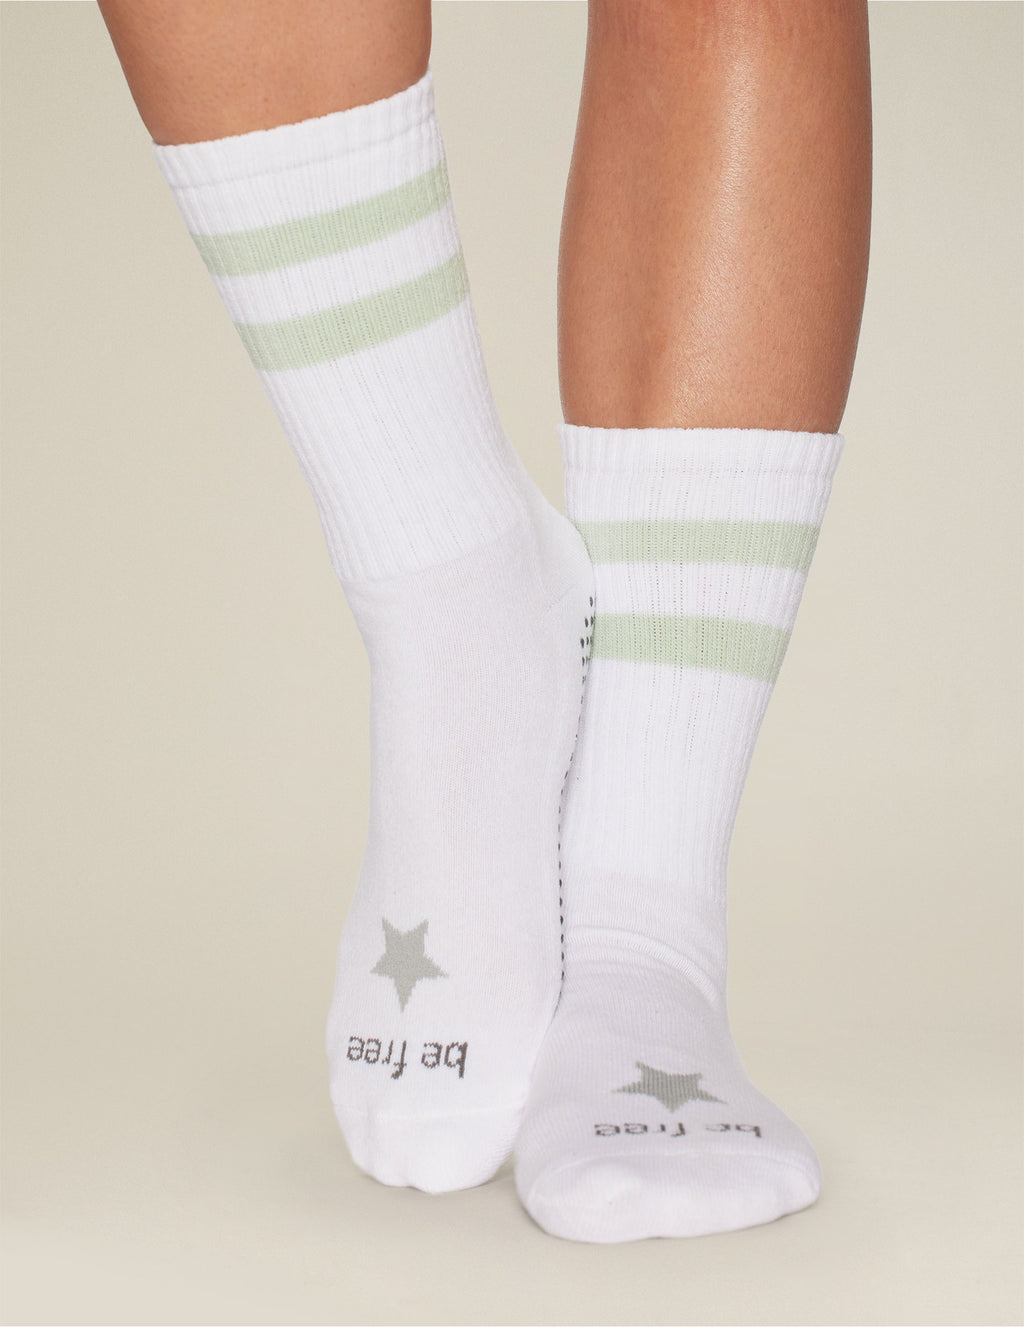 Sticky Be Free Crew Grip Socks Featured Image